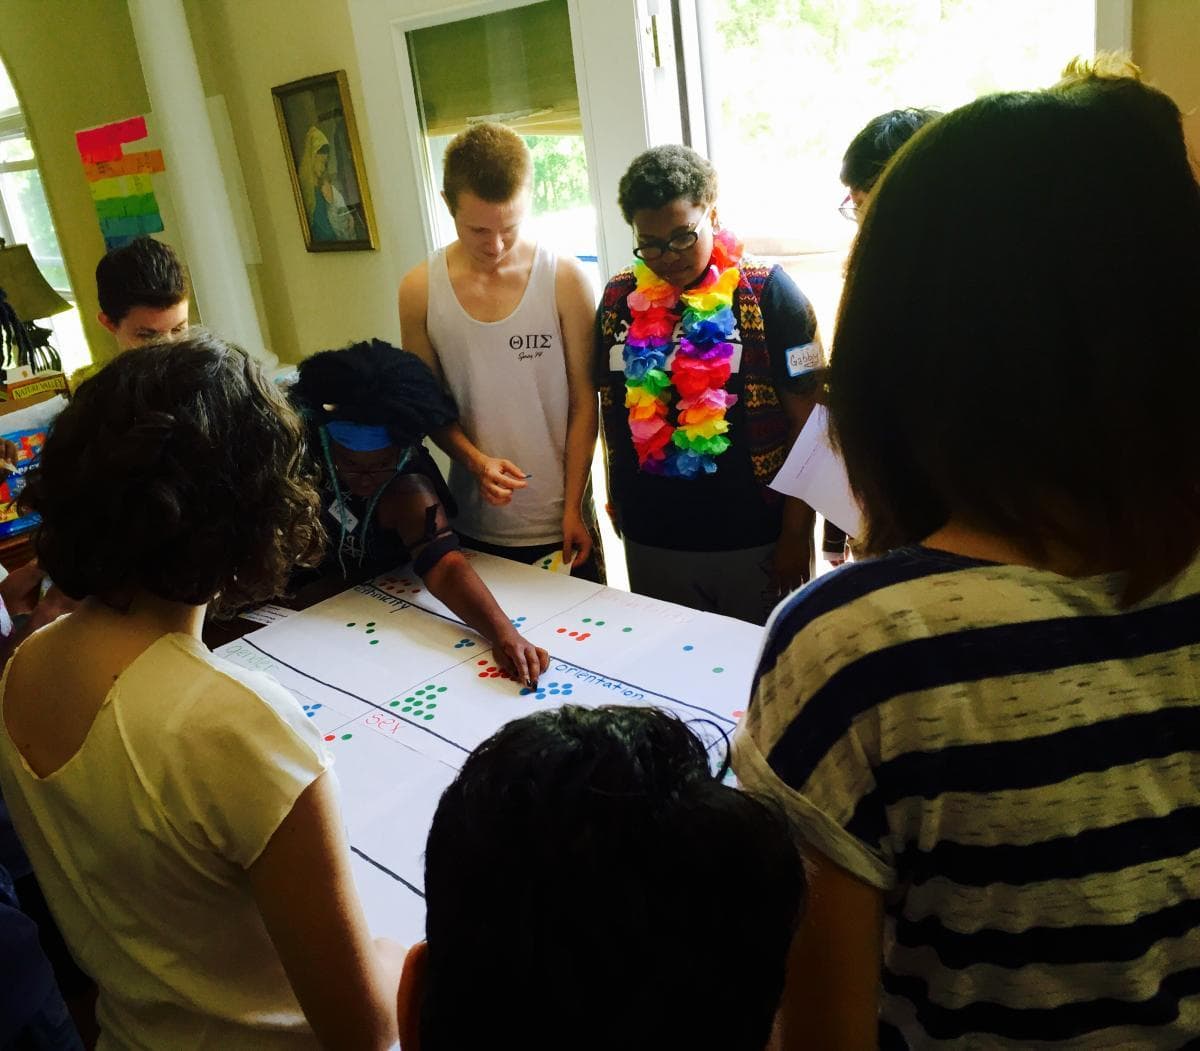 A group of people filling in an identity chart together.